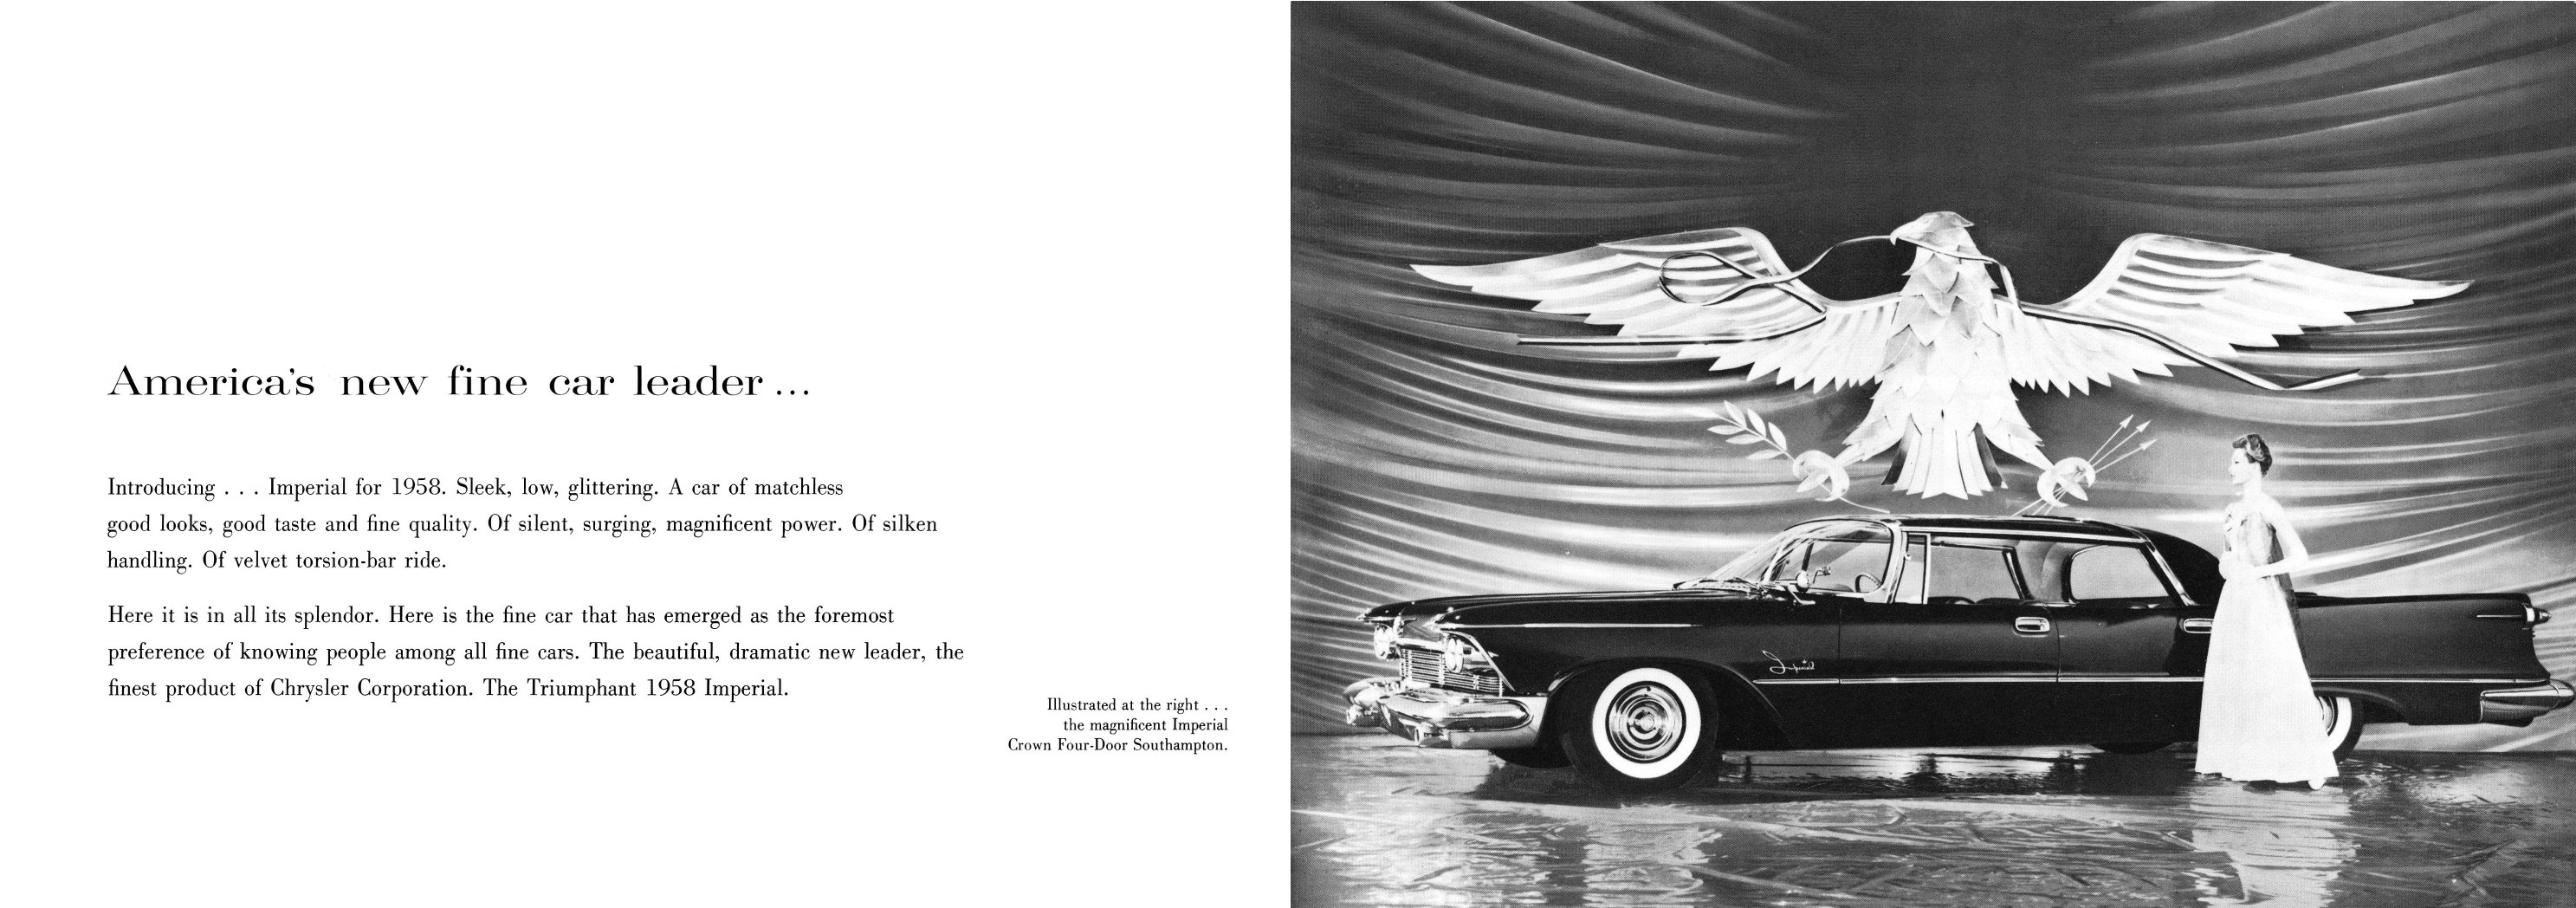 1958 Imperial Foldout (bw)-03-04